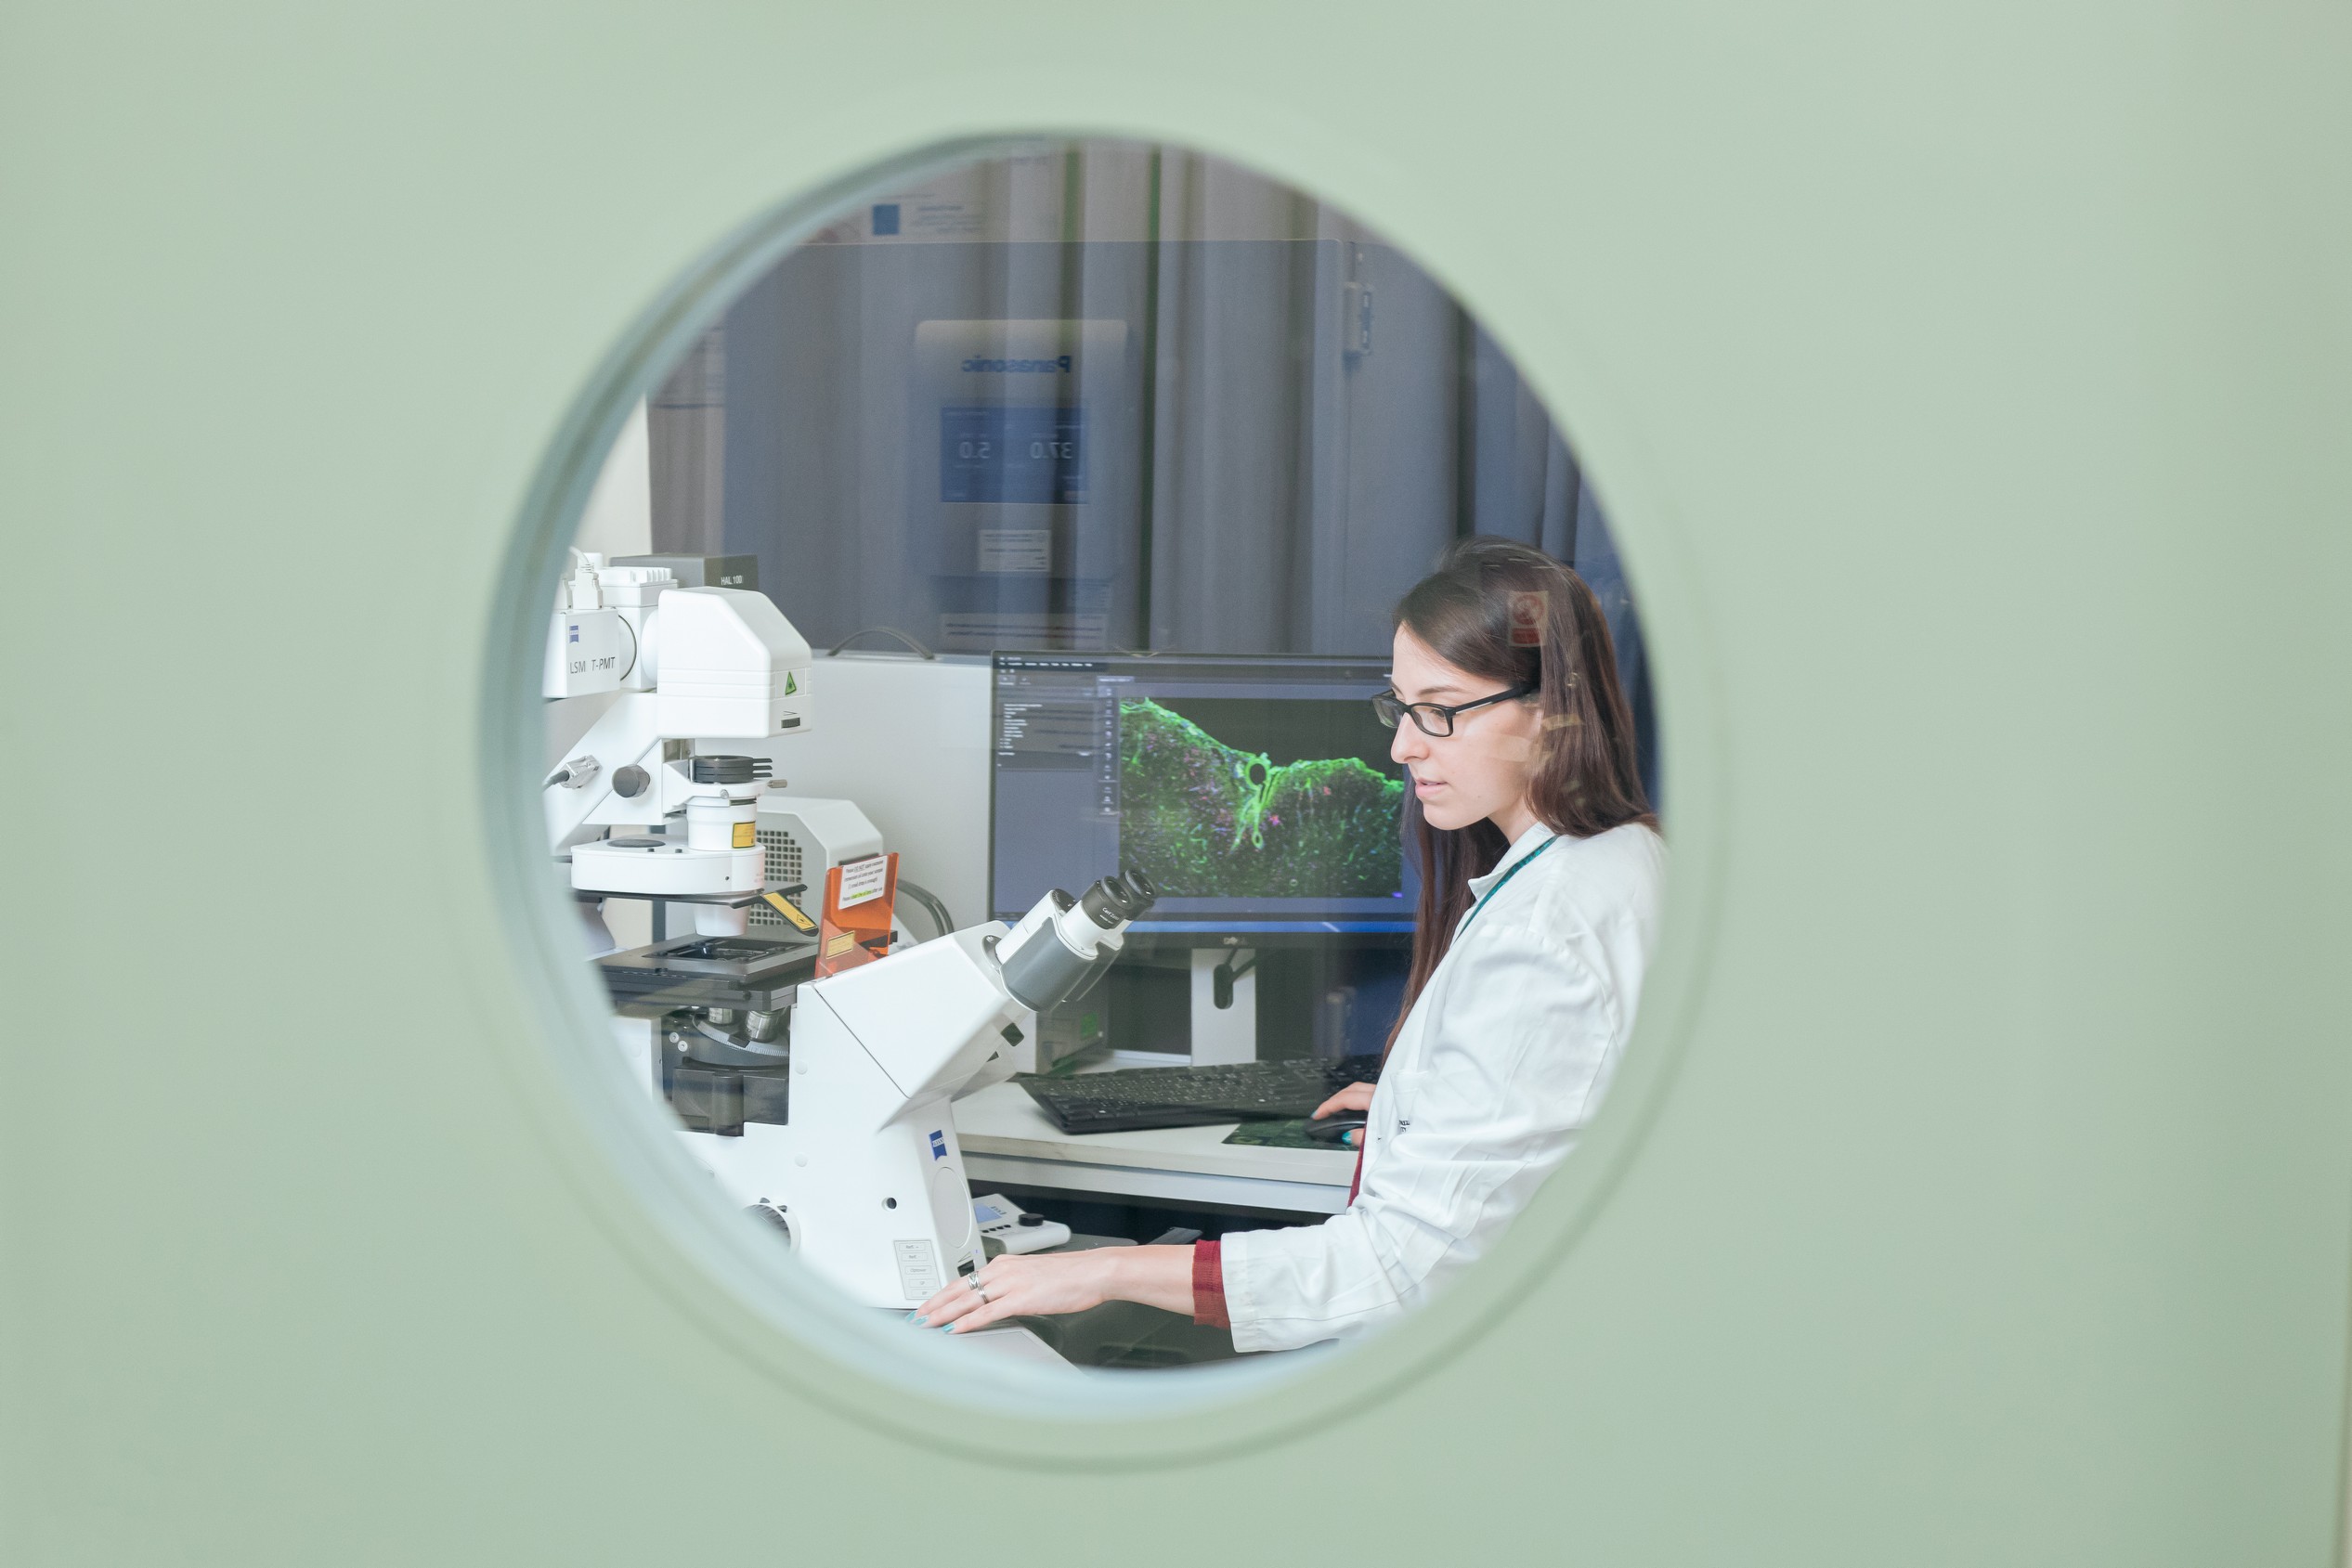 A researcher working in a lab, seen through the glass window of the door.